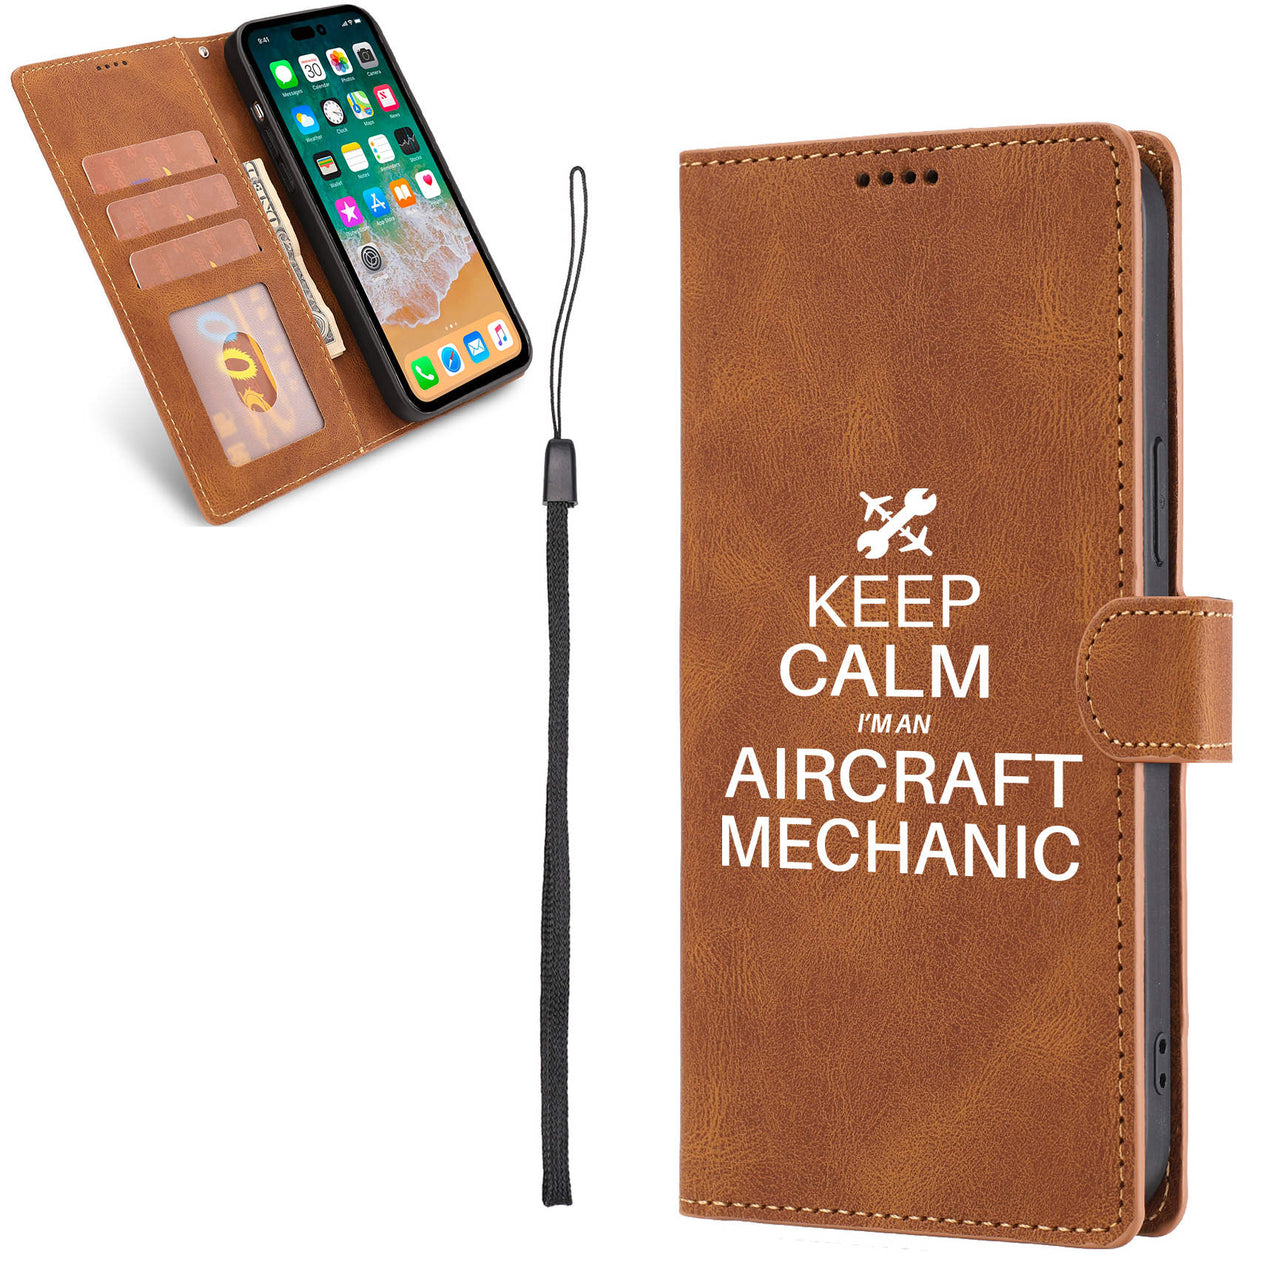 Aircraft Mechanic Designed Leather iPhone Cases